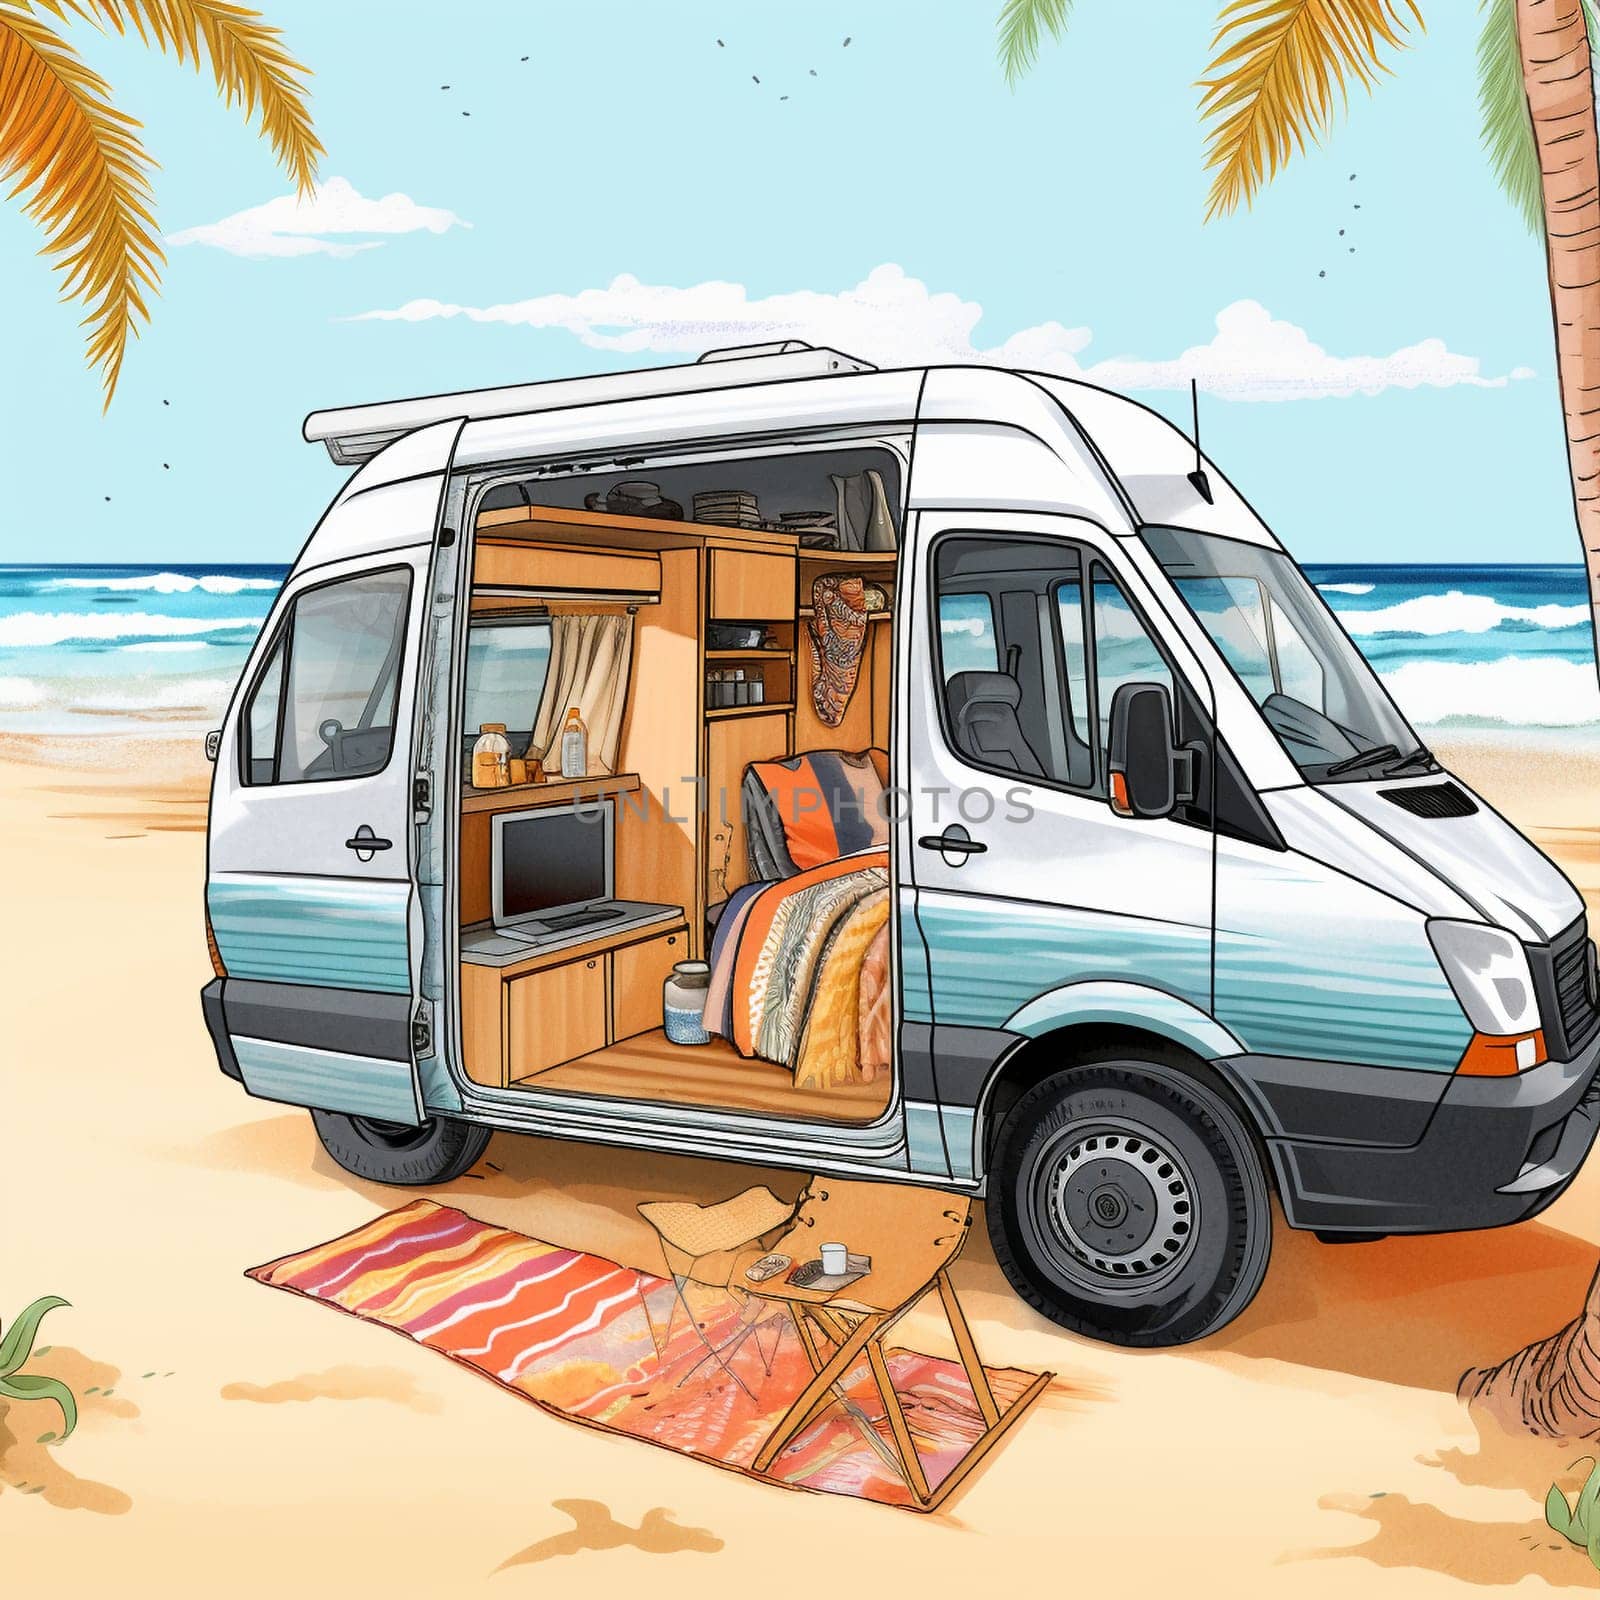 Escape to the beach with this image of a converted sprinter van parked on a sandy beach, with a calm ocean and a palm tree visible in the background. The van's interior is bright and colorful, creating a fun and playful atmosphere. Relax on the comfortable bed or cook up a meal in the small but functional kitchen. A set of beach chairs and an umbrella are set up outside the van, inviting you to sit back and enjoy the sun and the sound of the waves. This is the perfect location for anyone seeking a fun and relaxing beach getaway.